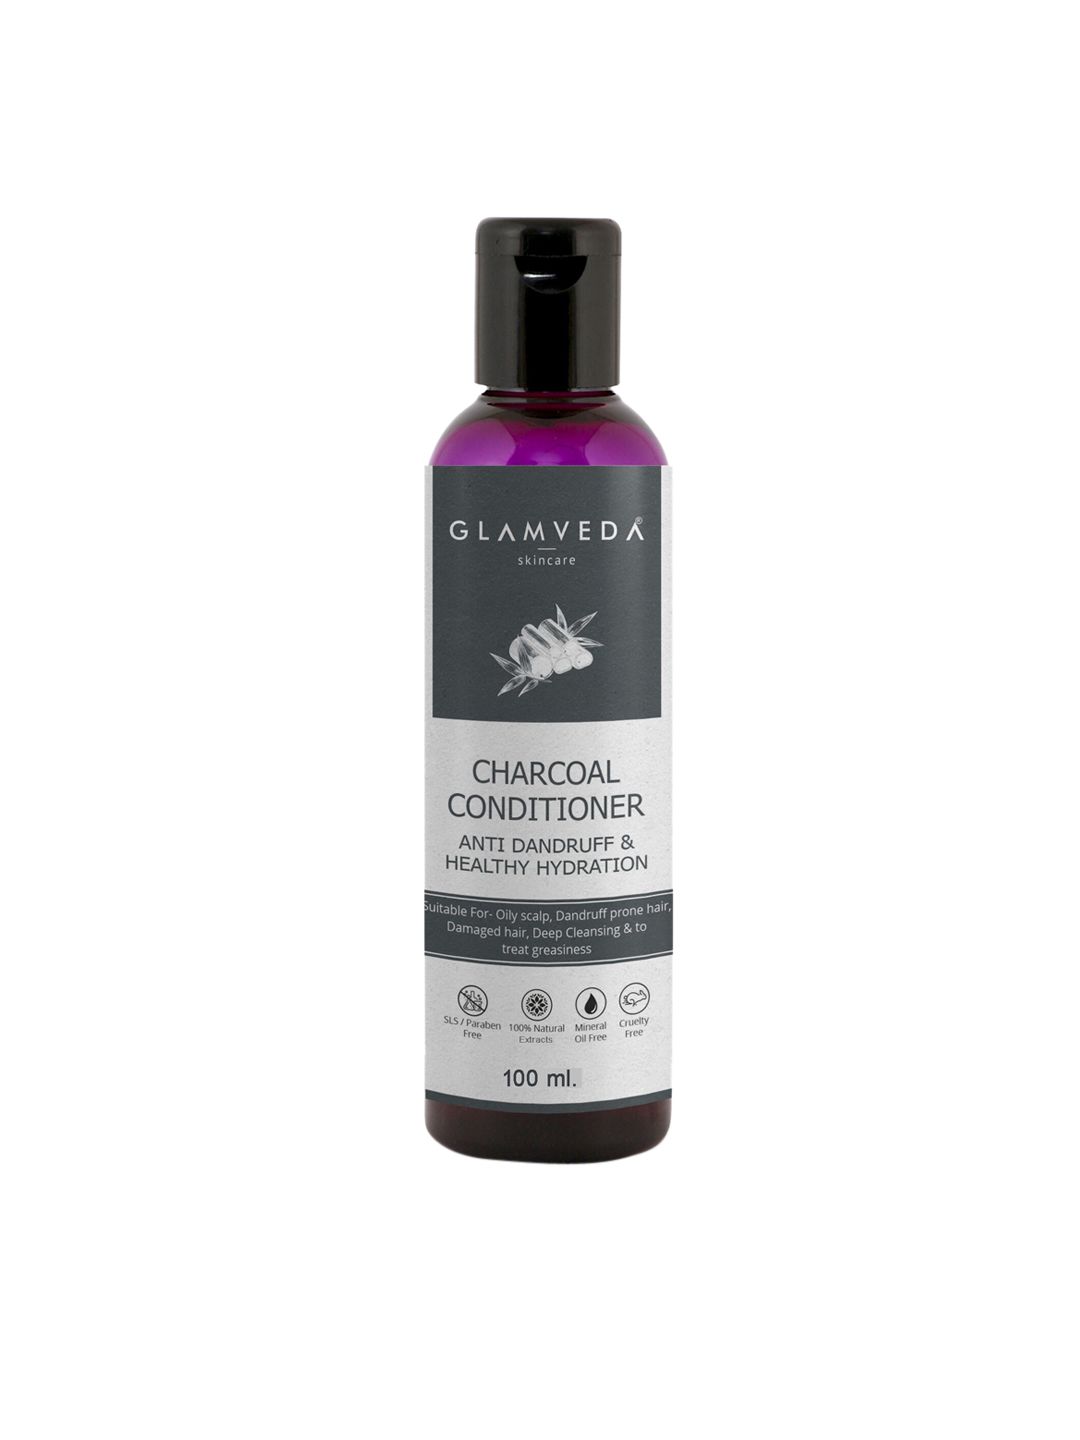 GLAMVEDA Anti Dandruff & Healthy Hydration Charcoal Conditioner - 100 ml Price in India